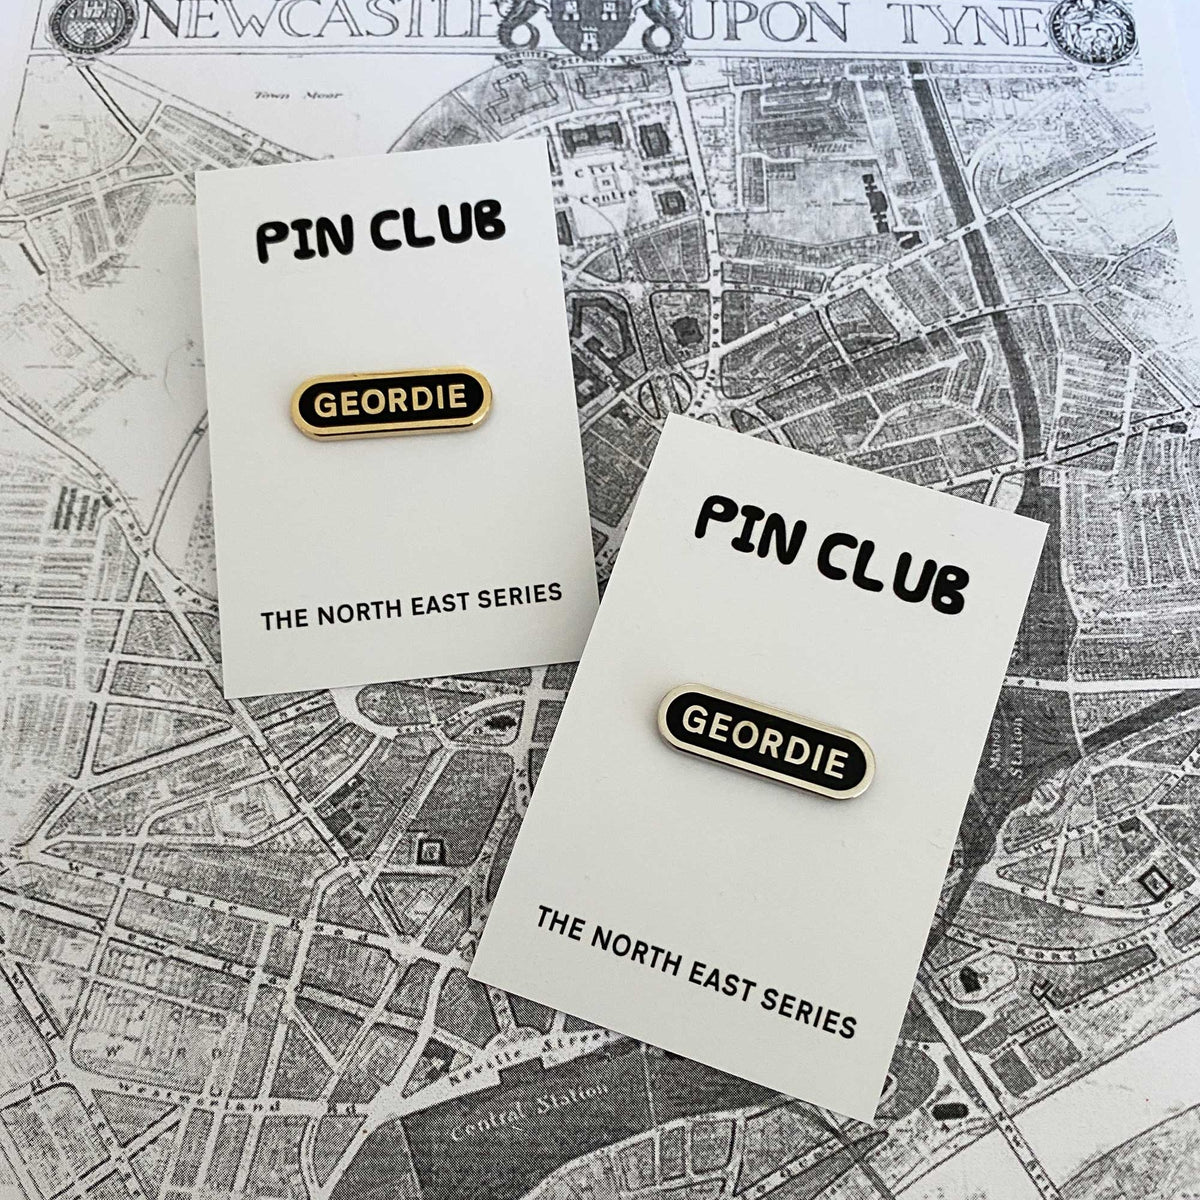 Pin Club Geordie Pin Silver and Gold